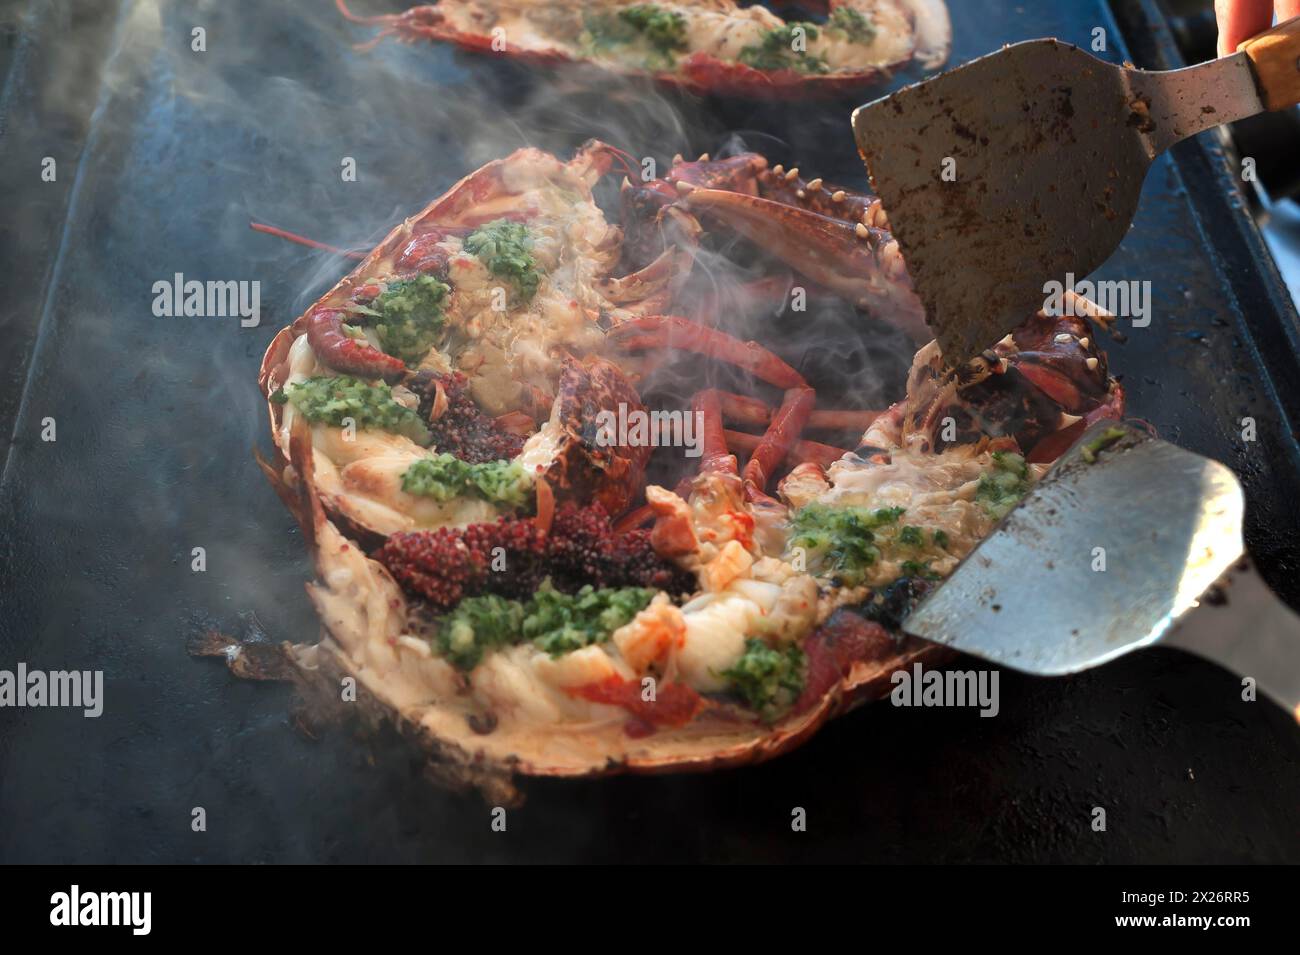 Cooked lobster (homarus) with caviar, vegetables and garlic butter on a plancha, Atlantic coast, Vandee, France Stock Photo